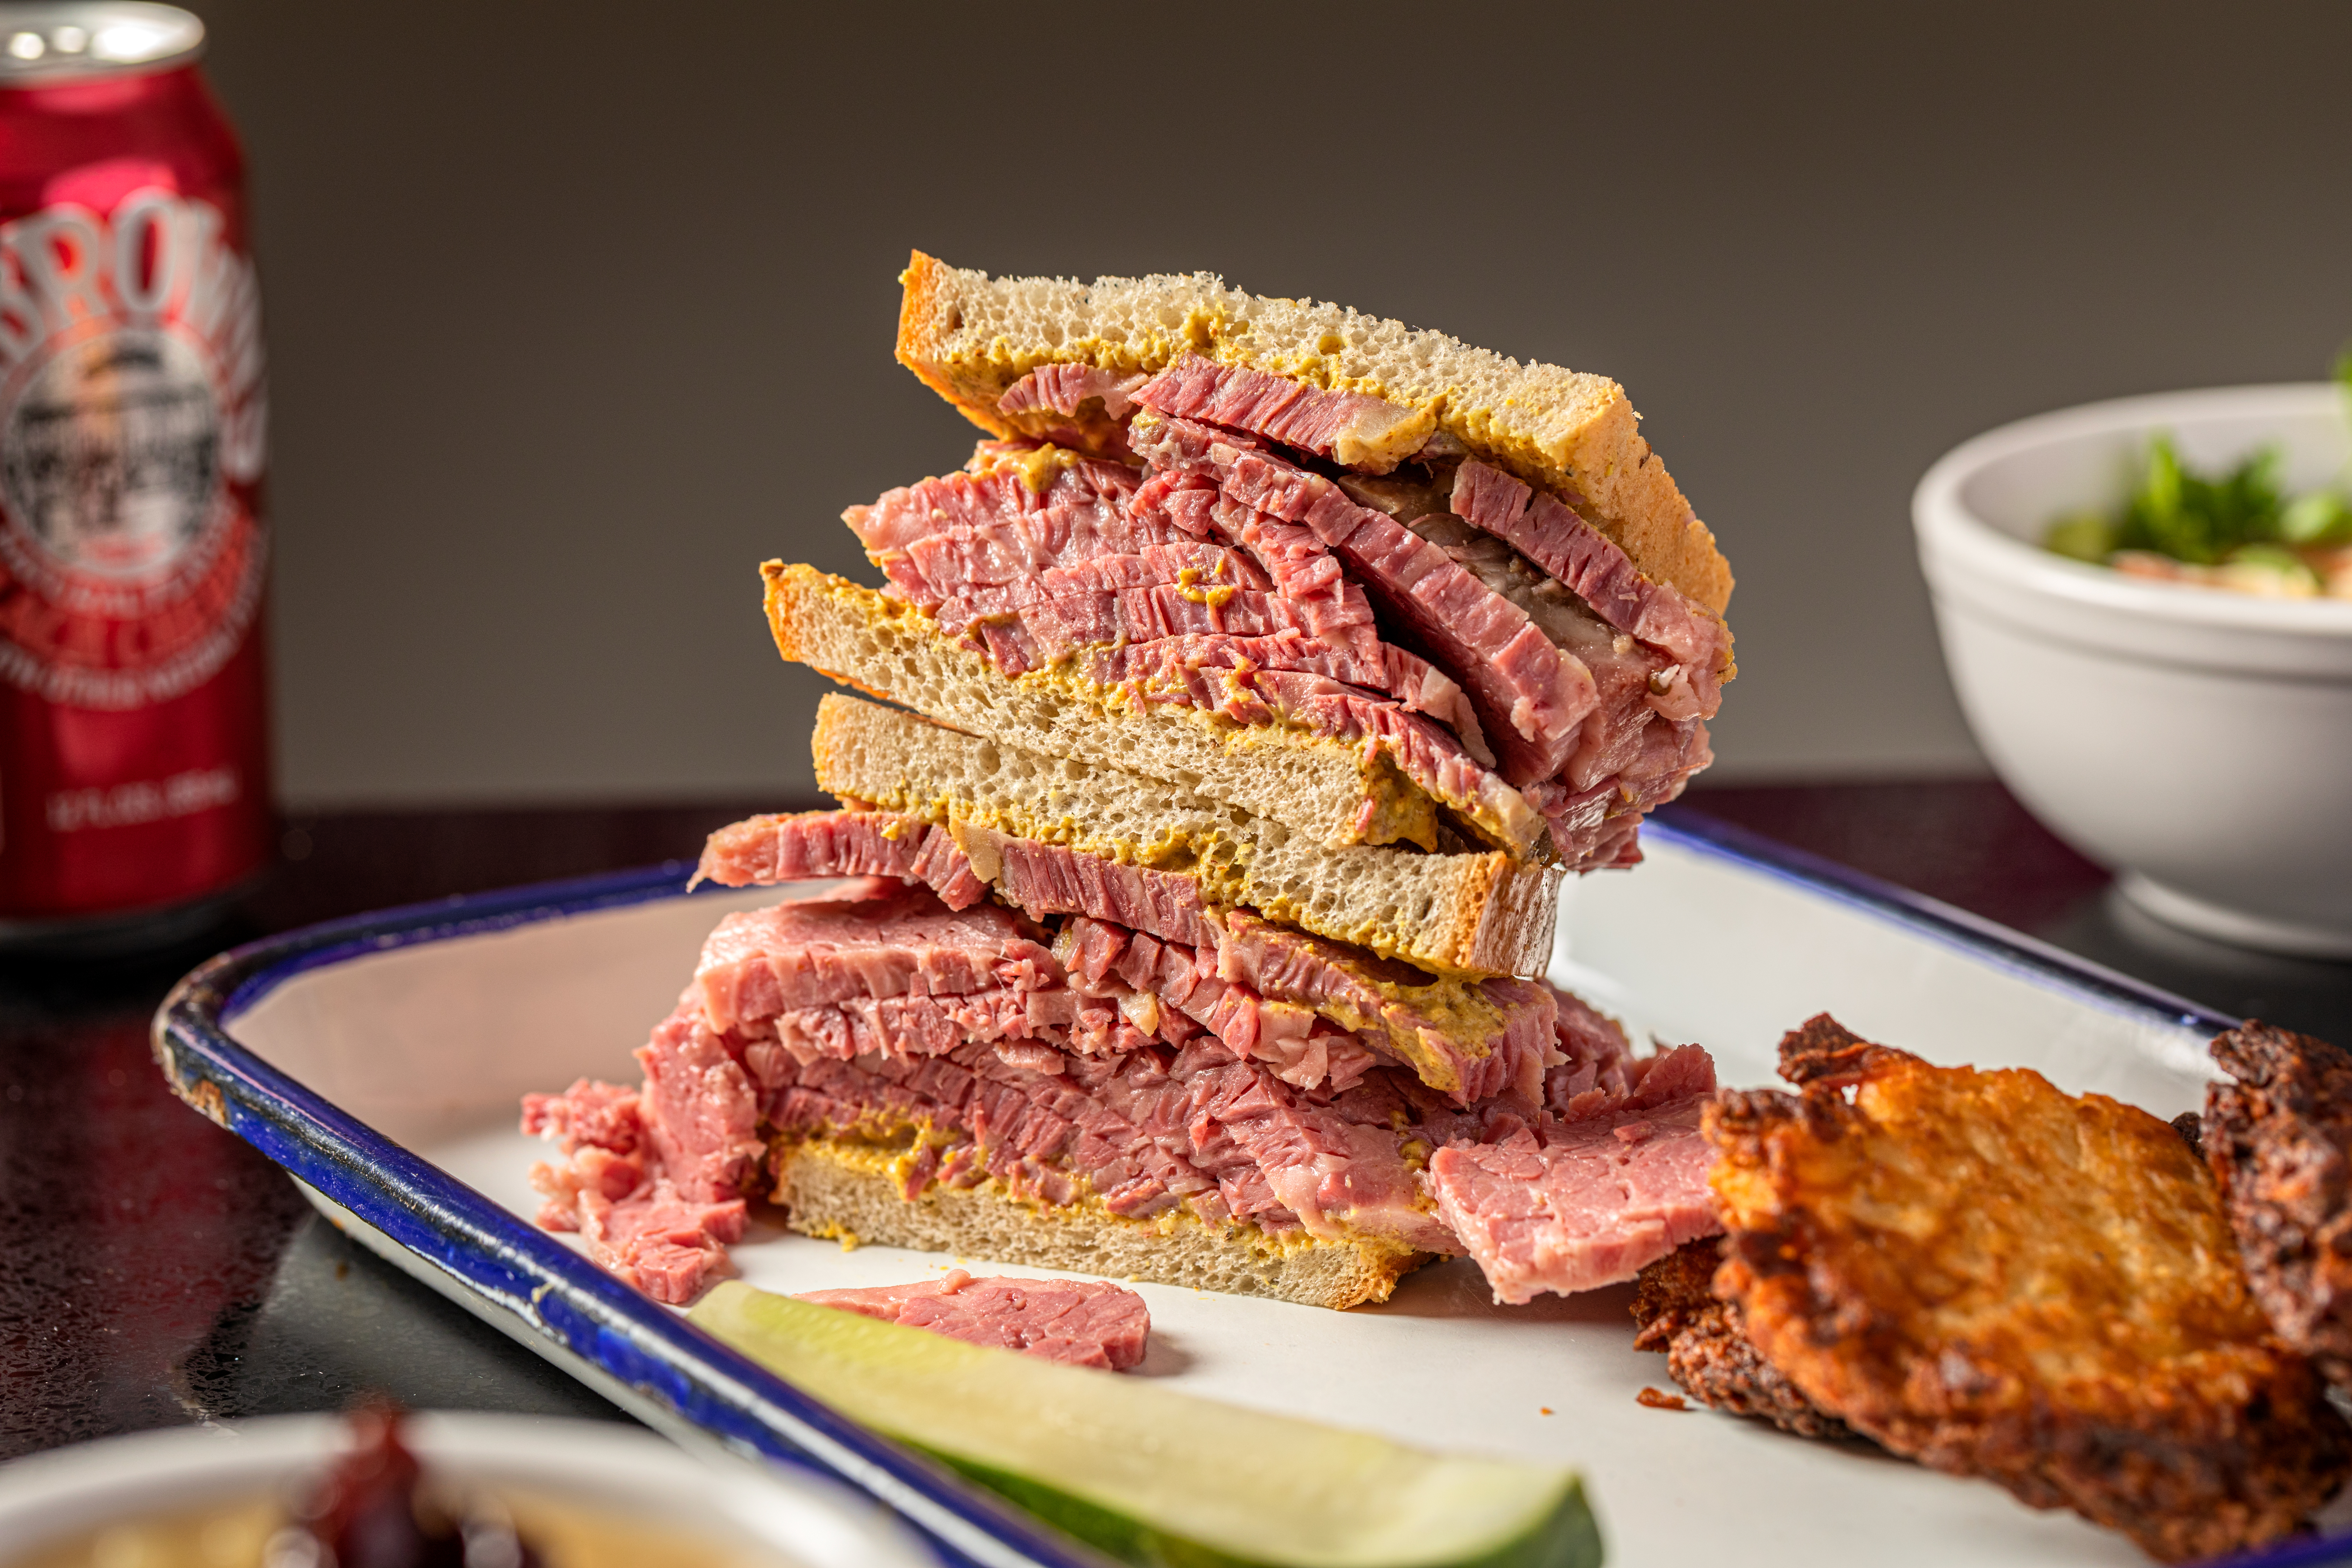 A tray with a halved corned beef sandwich.